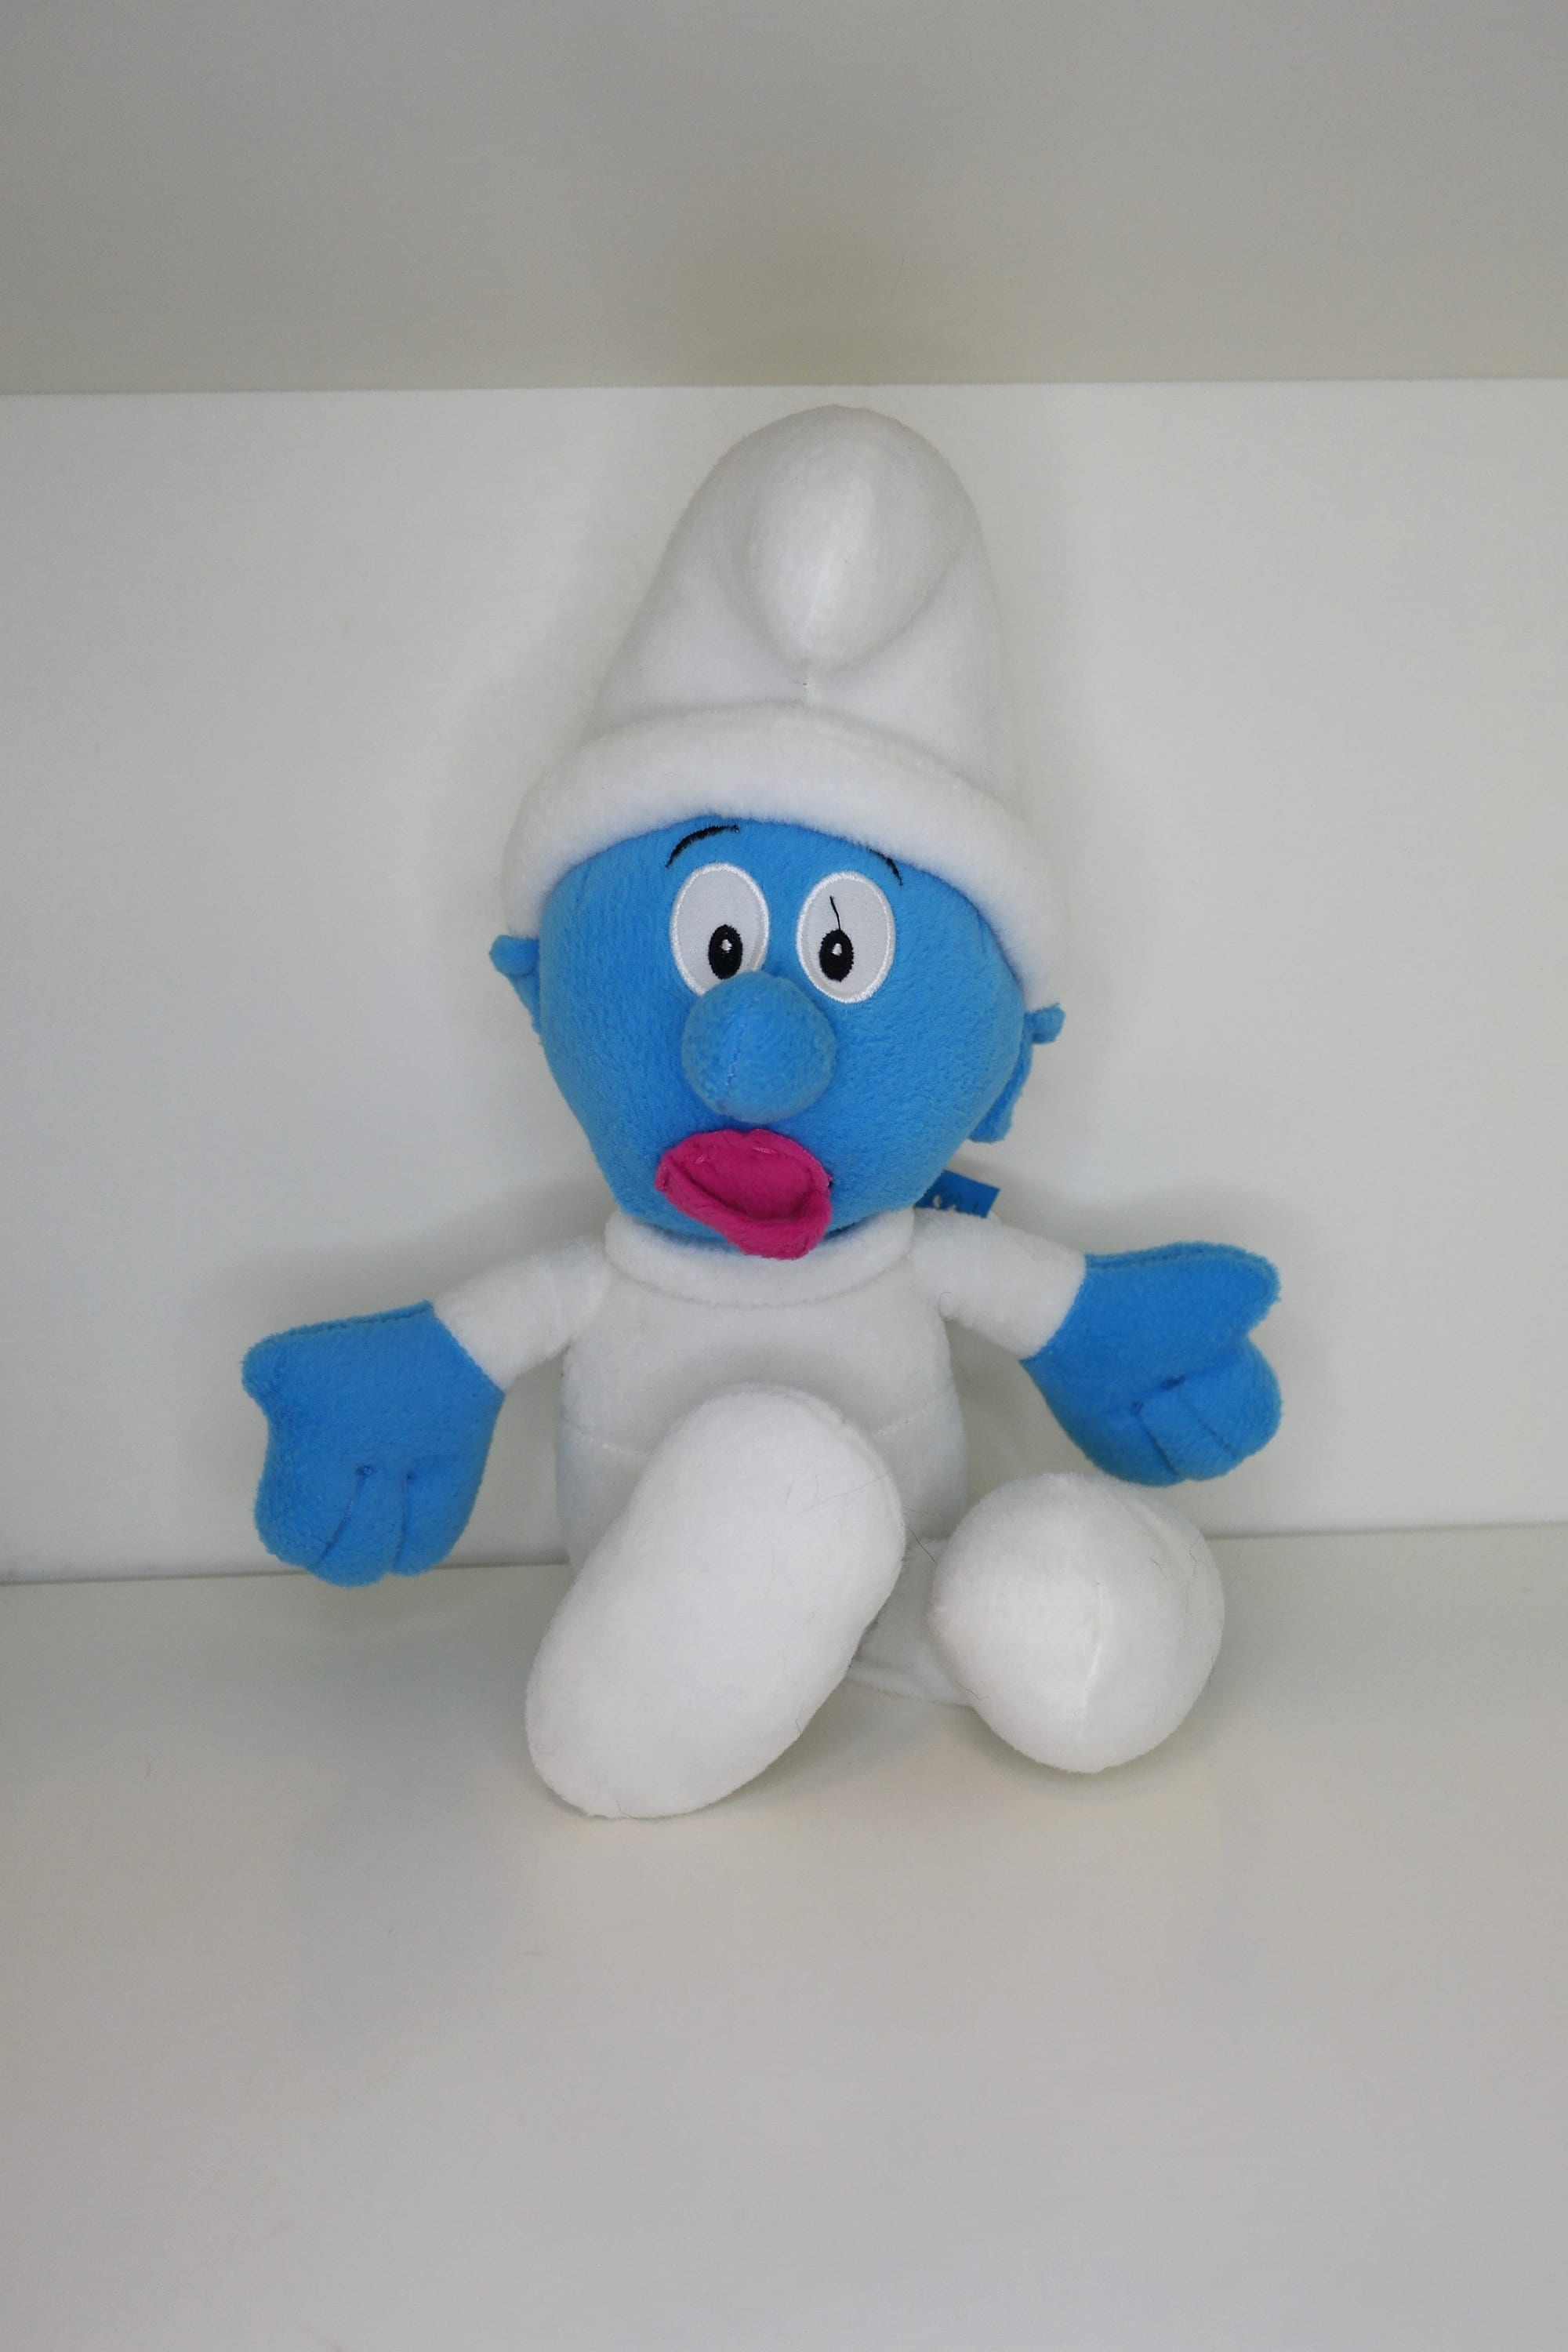 Smurfs The Clumsy Smurf Huge Big Large Plush Soft Doll Stuffed Toy